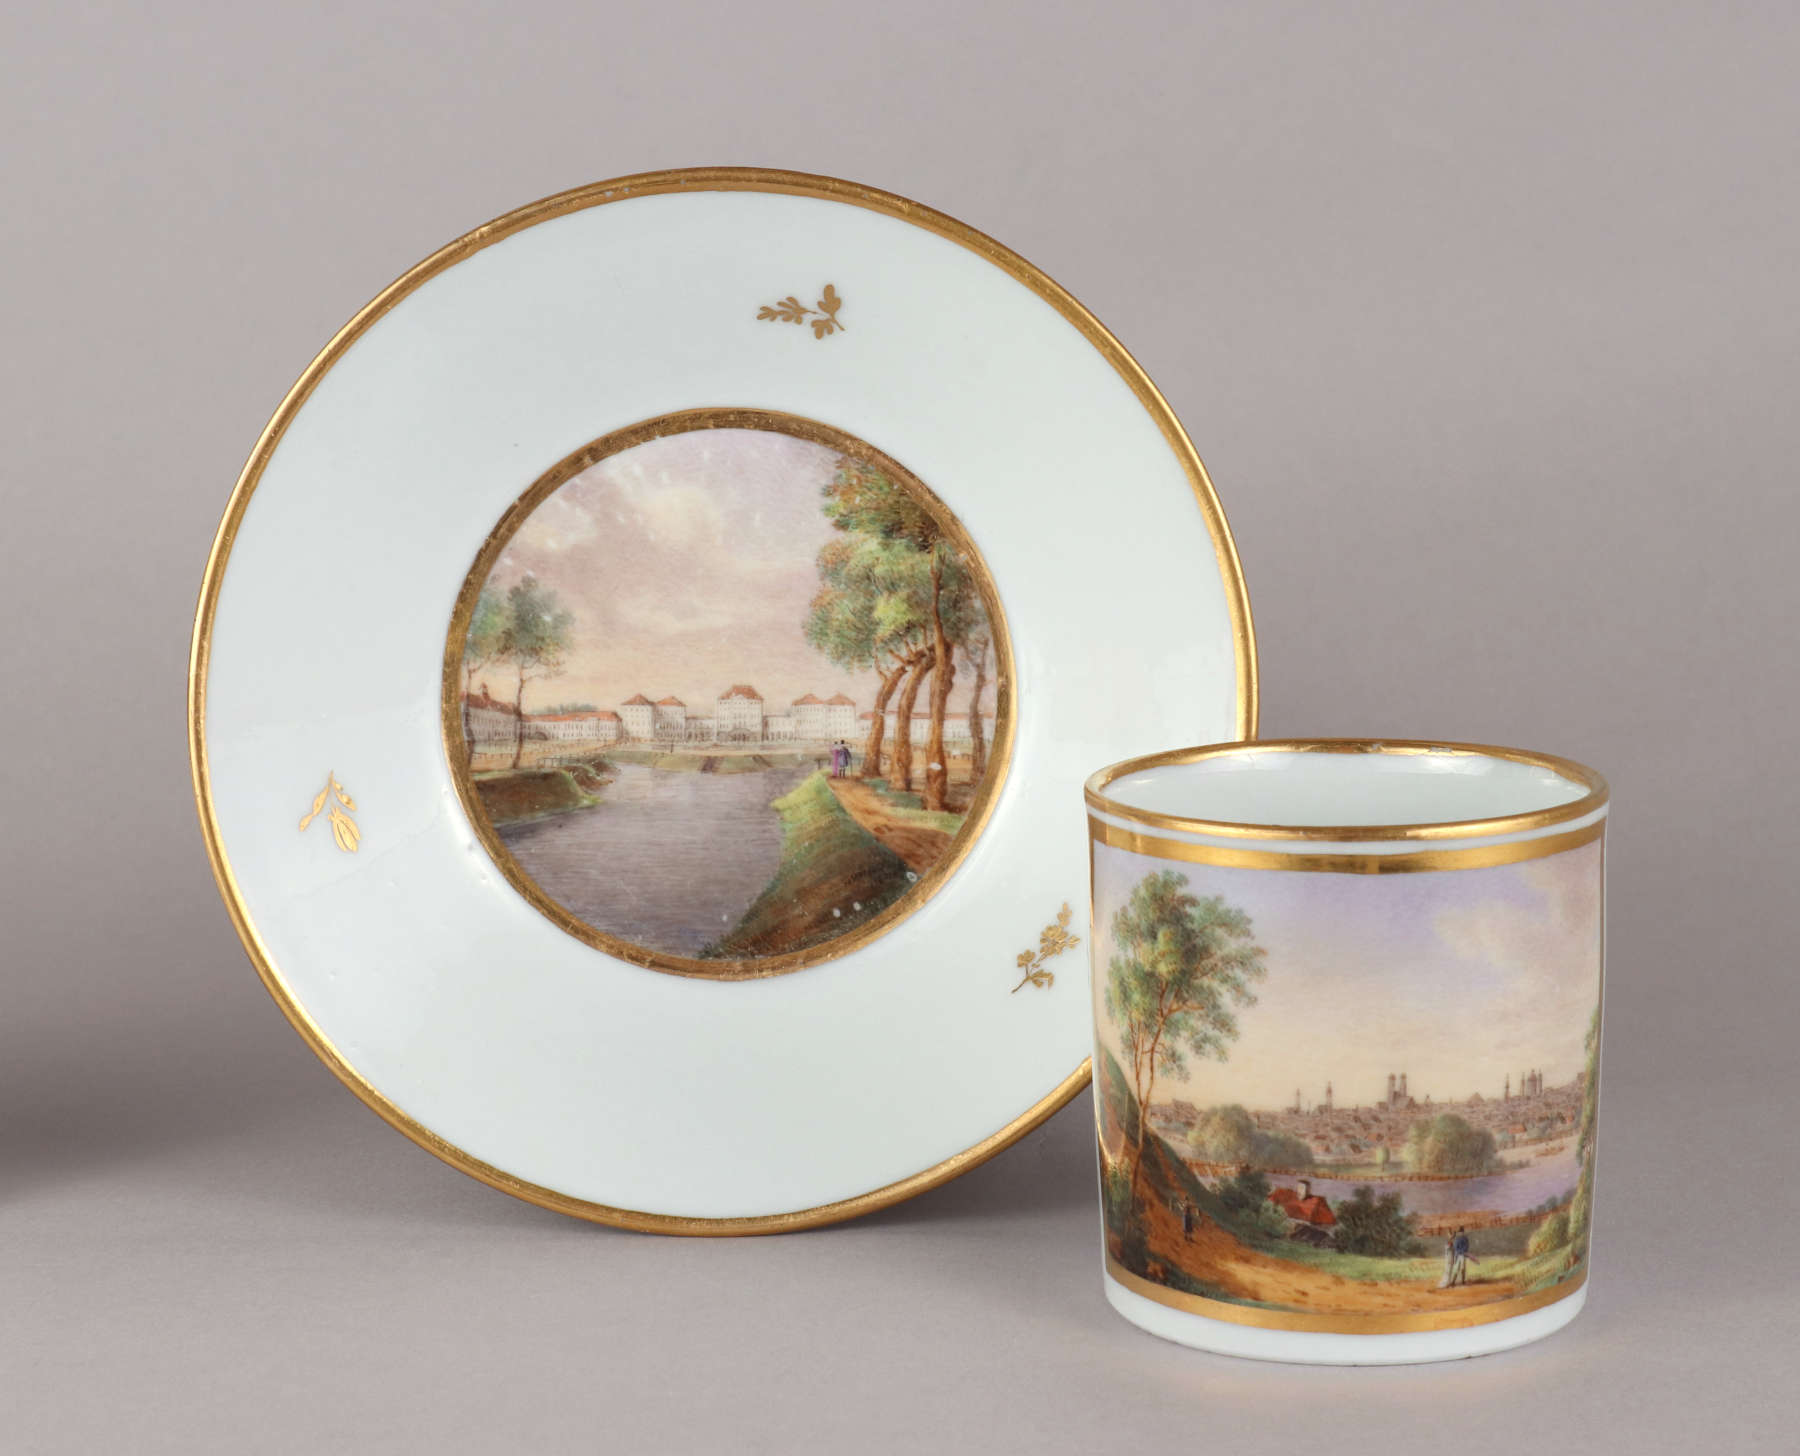 German Porcelain Topographical Cup and Saucer, c. 1800